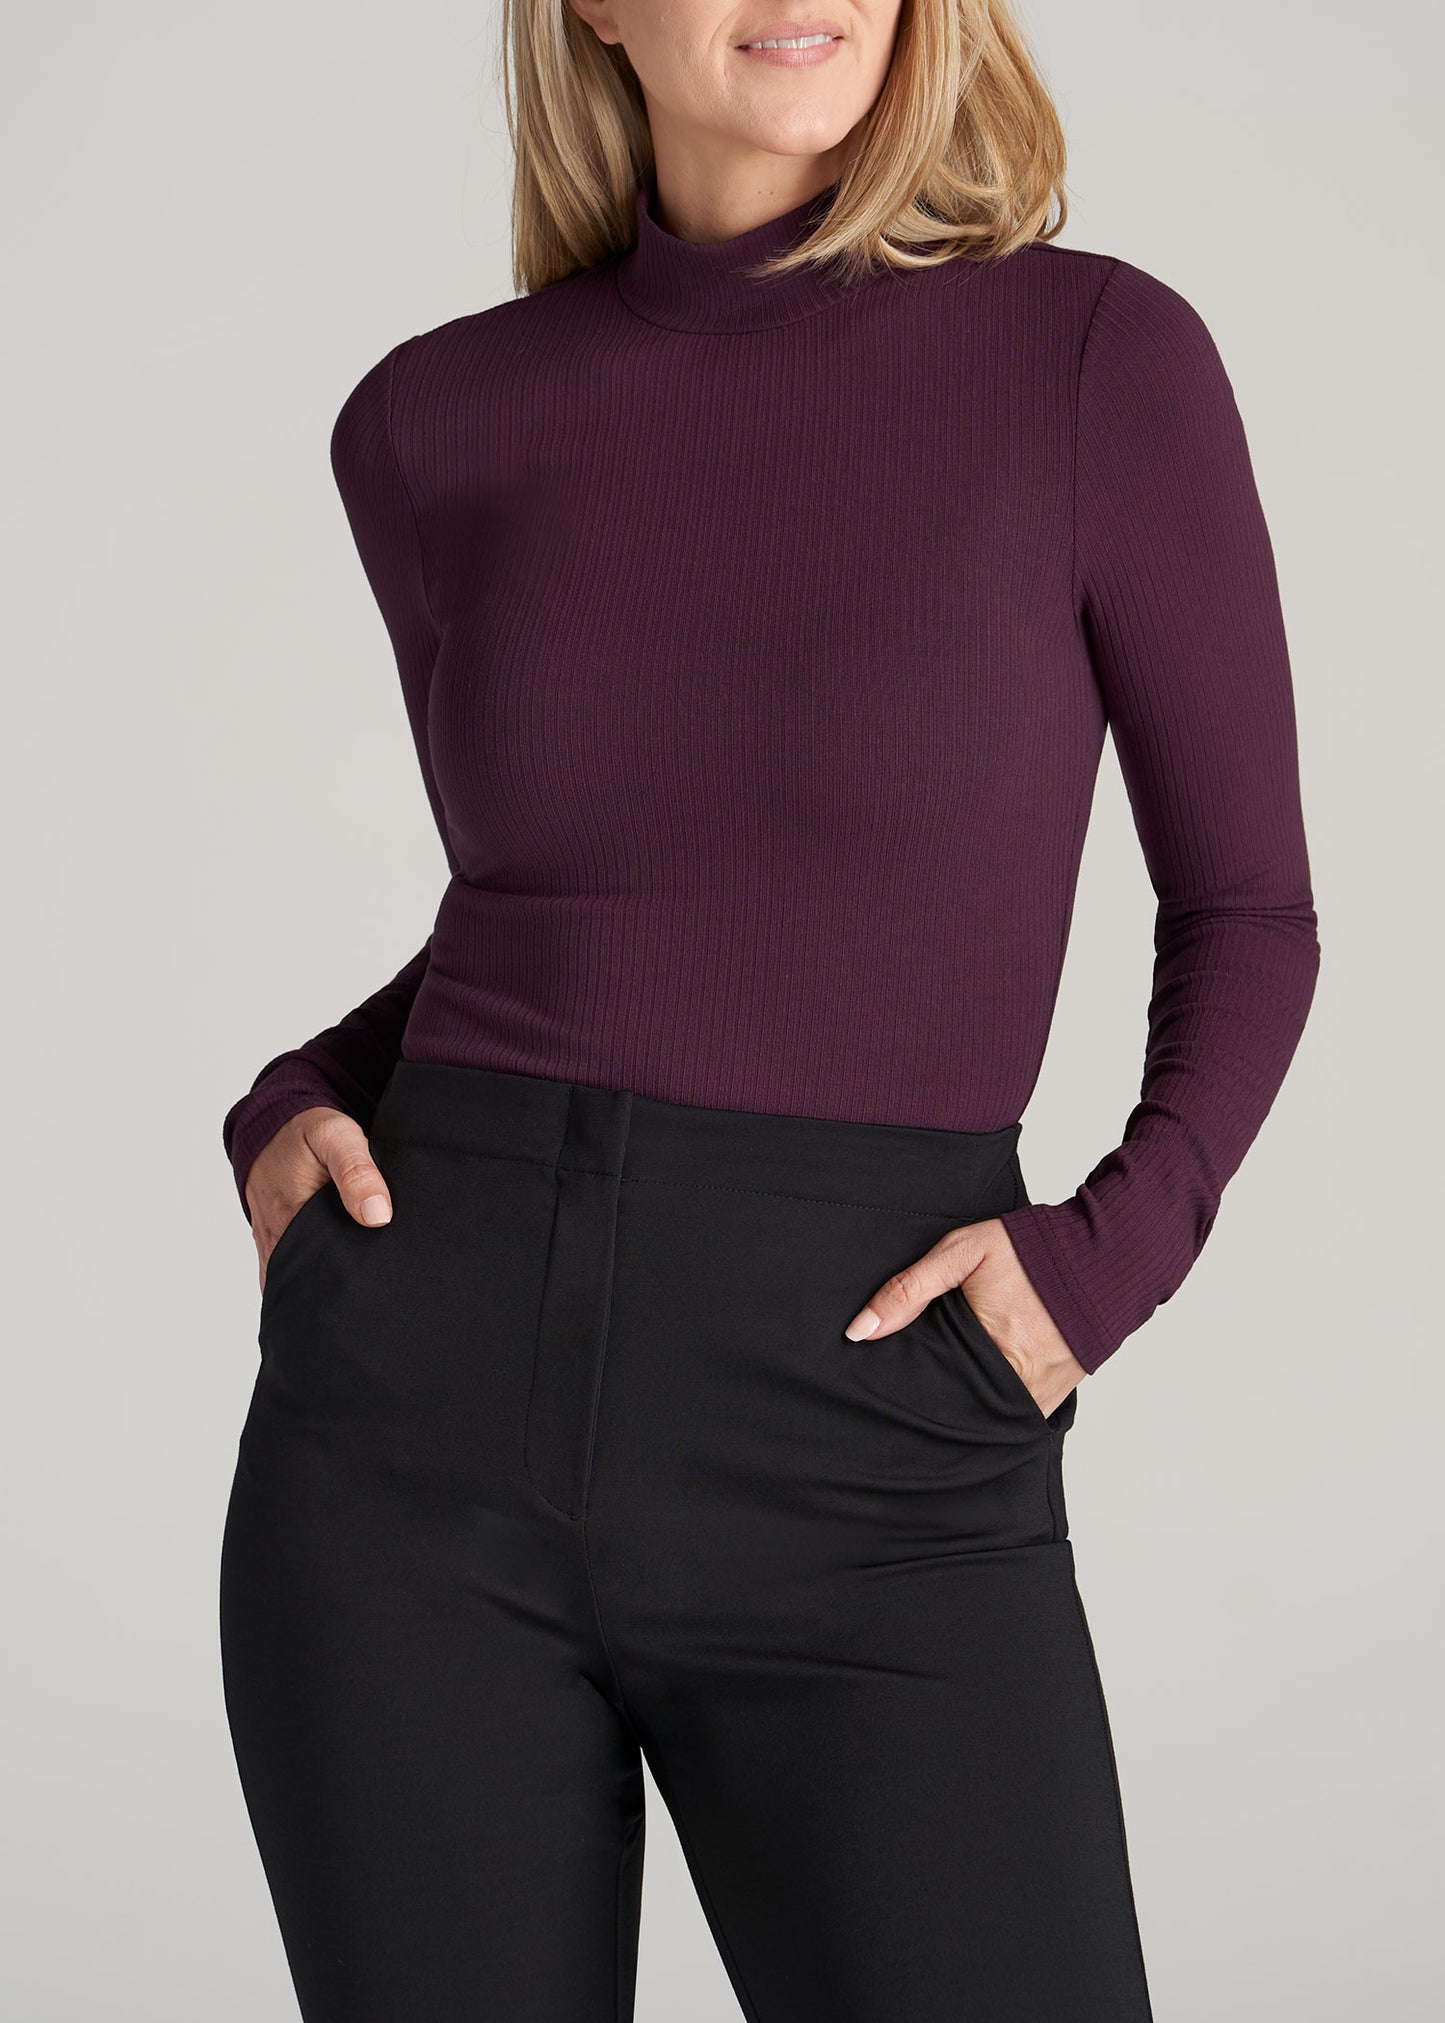        American-Tall-Women-LS-Mock-Neck-Ribbed-Top-Maroon-front